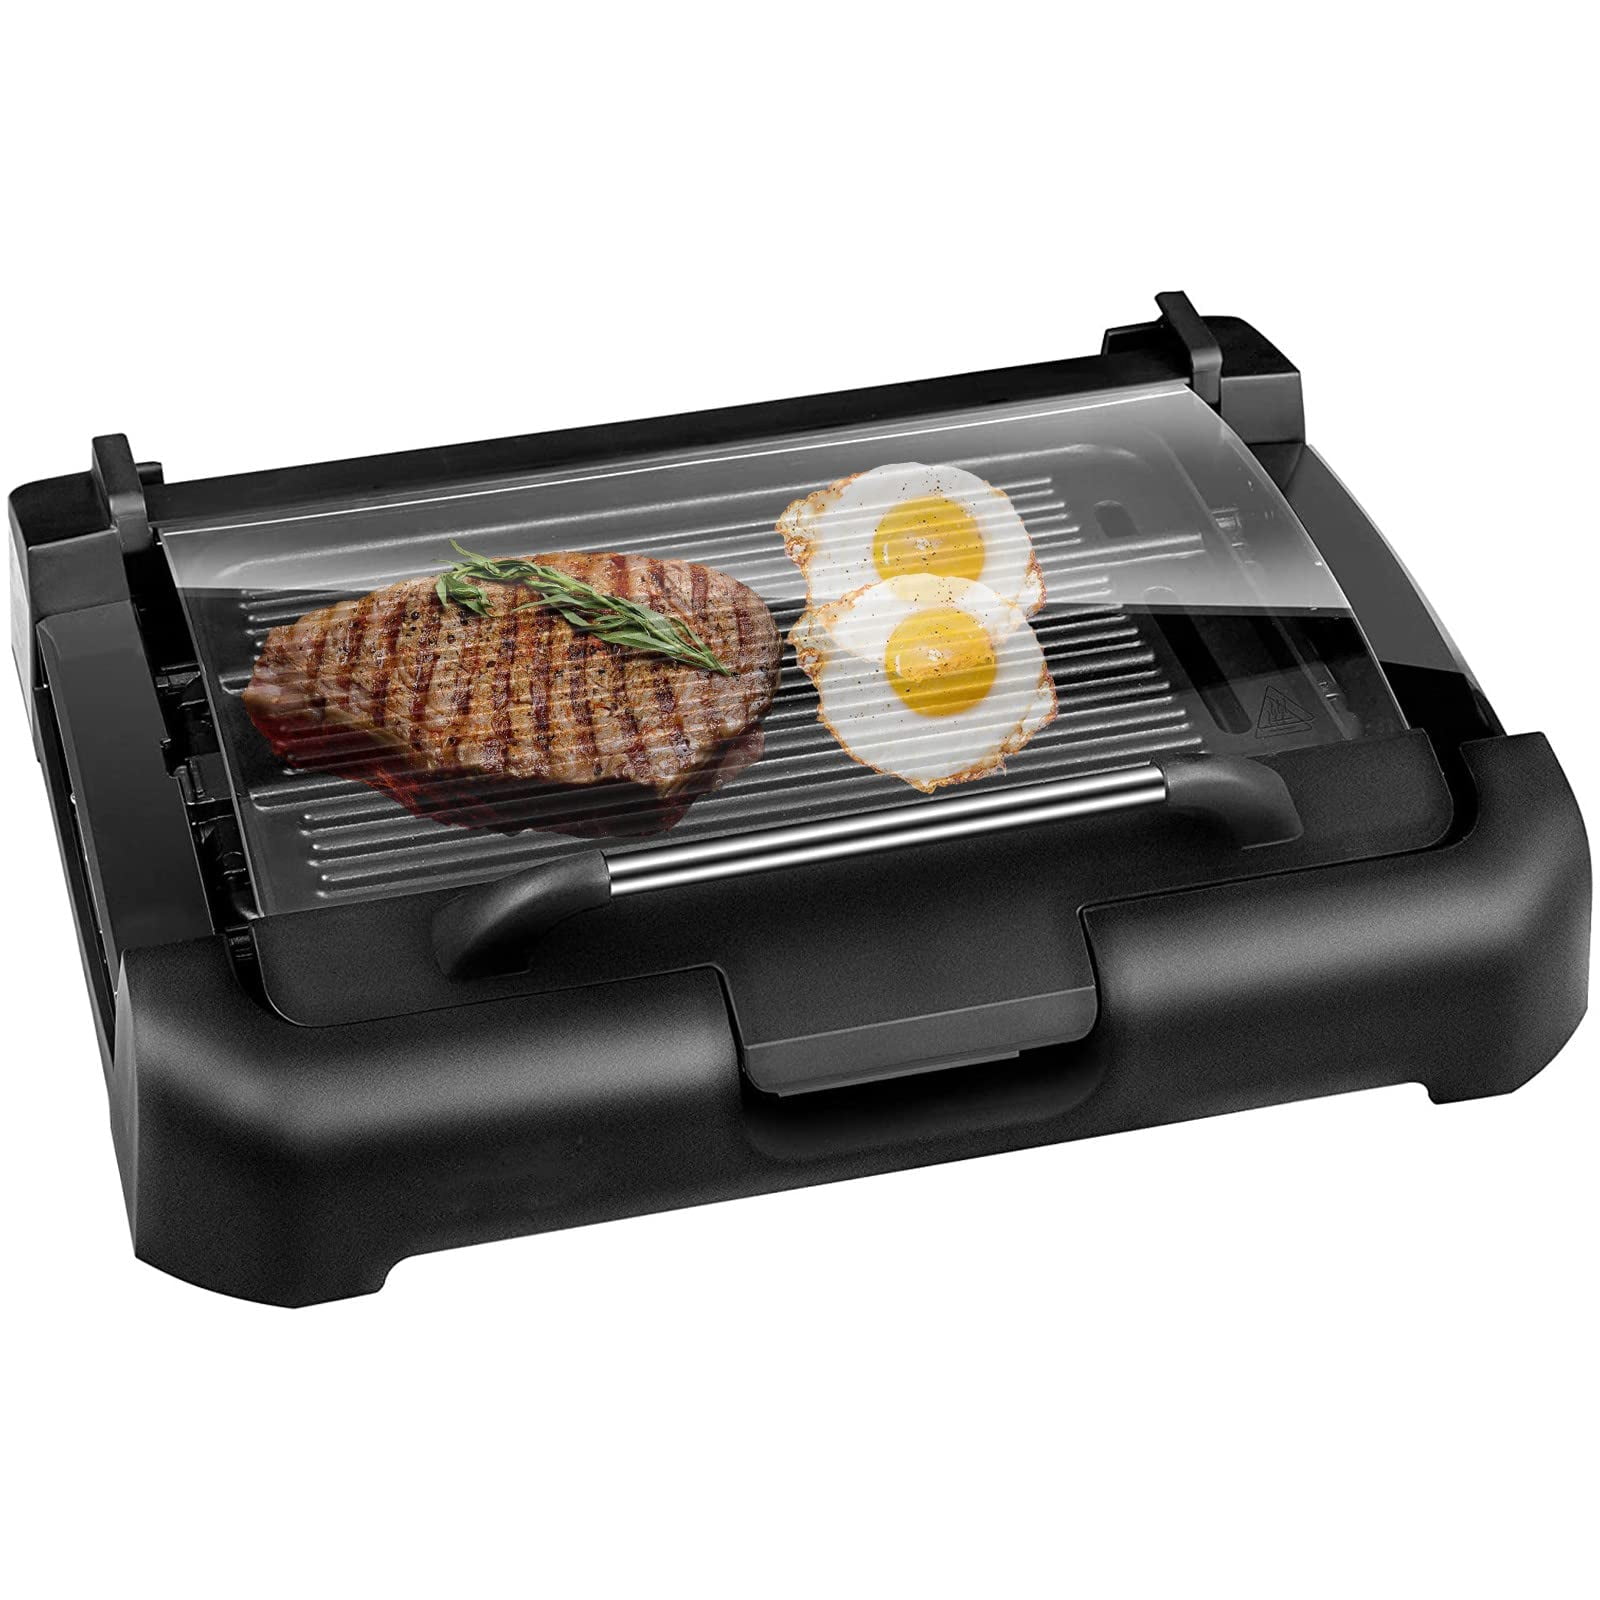 T-fal GC702 OptiGrill Stainless Steel Indoor Electric Grill with Removable  and Dishwasher Safe plates,1800-watt, Silver